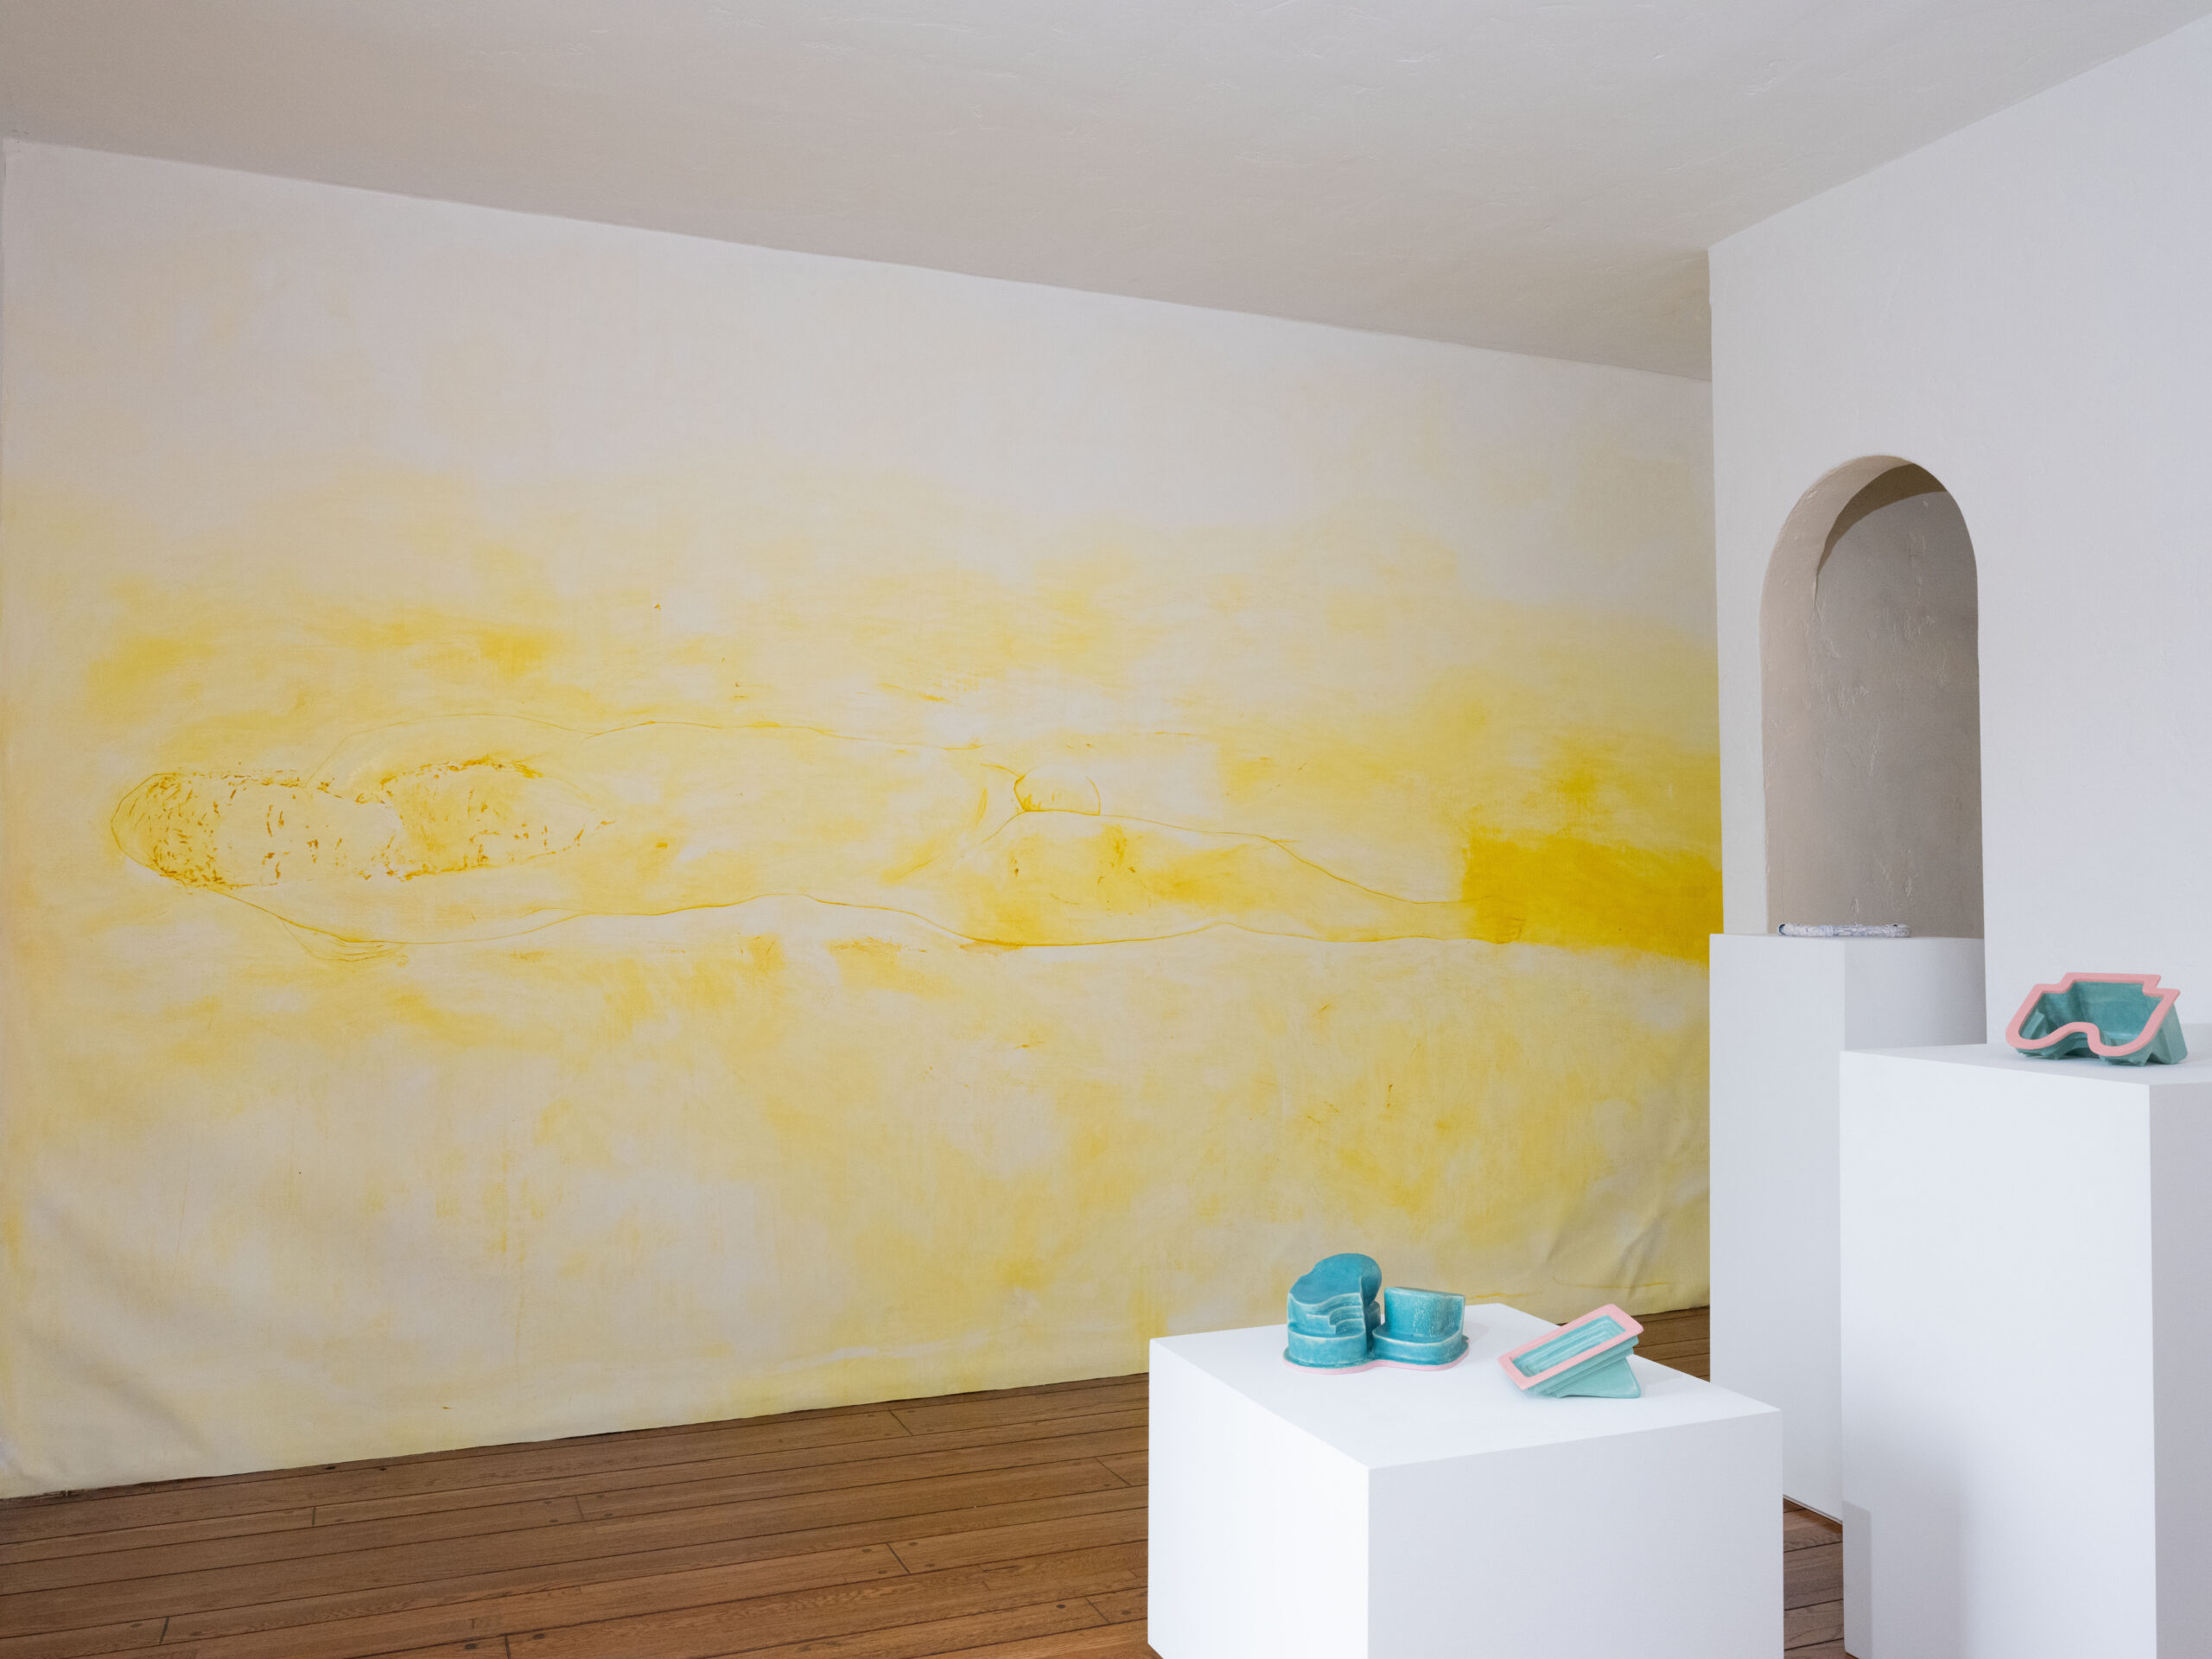 Installation view, Pepper Tree, works by Rebecca Shippee and Rocío Olivares